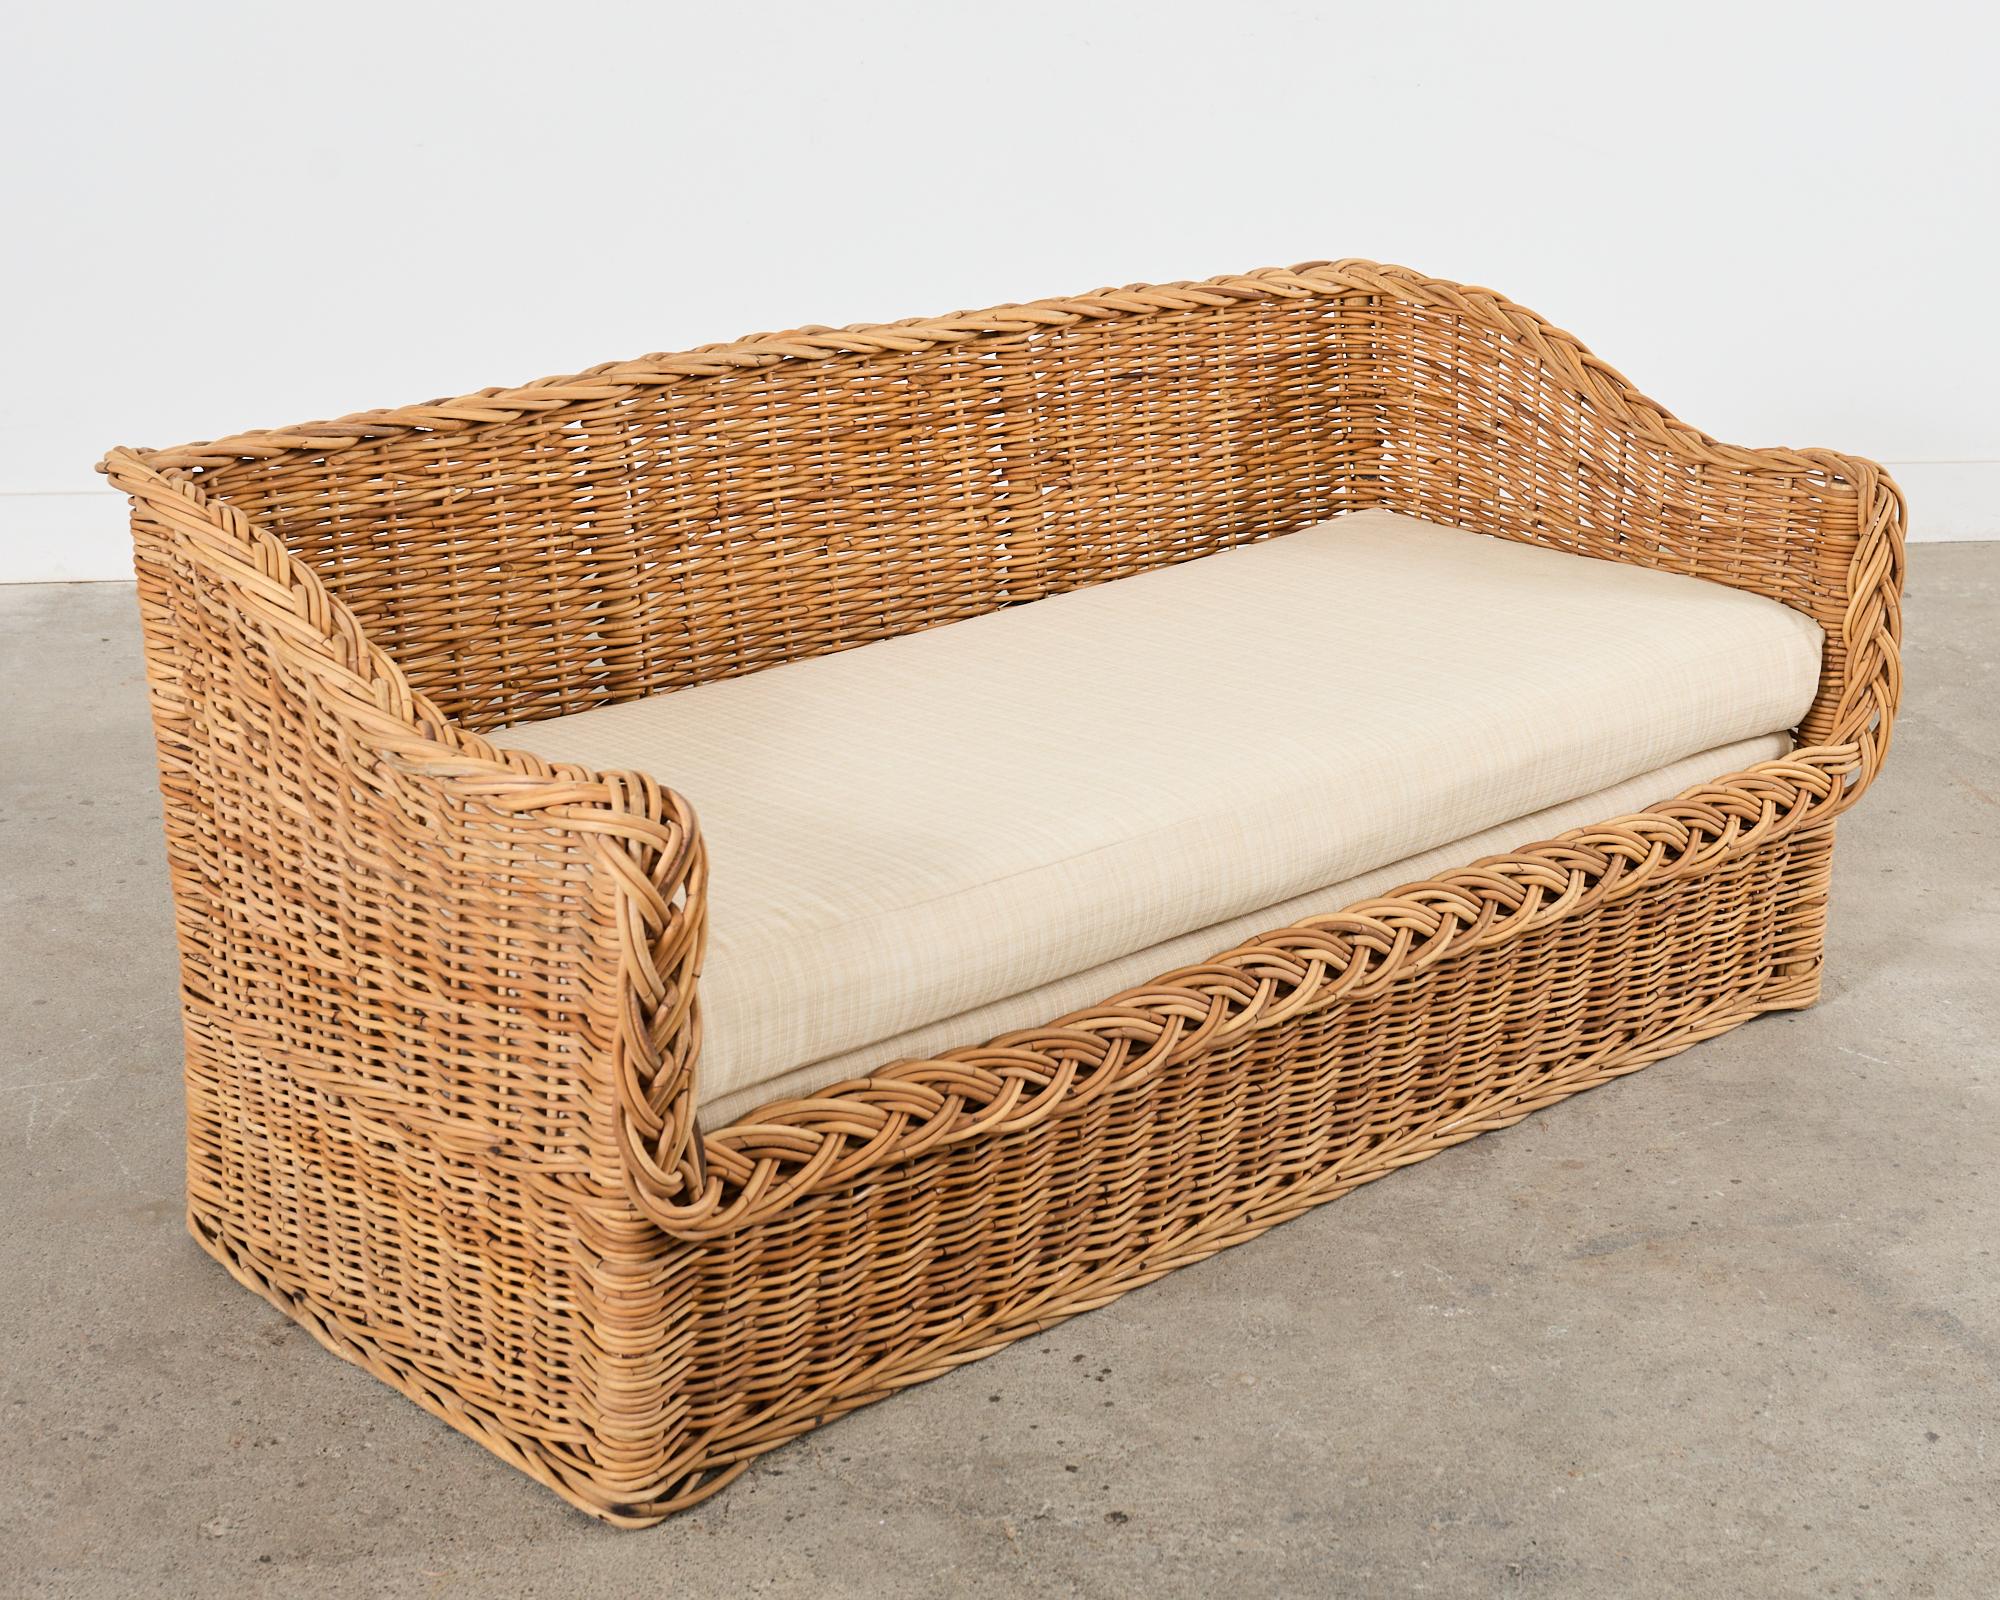 20th Century Michael Taylor Style Wicker Rattan Sofa by Wicker Works For Sale